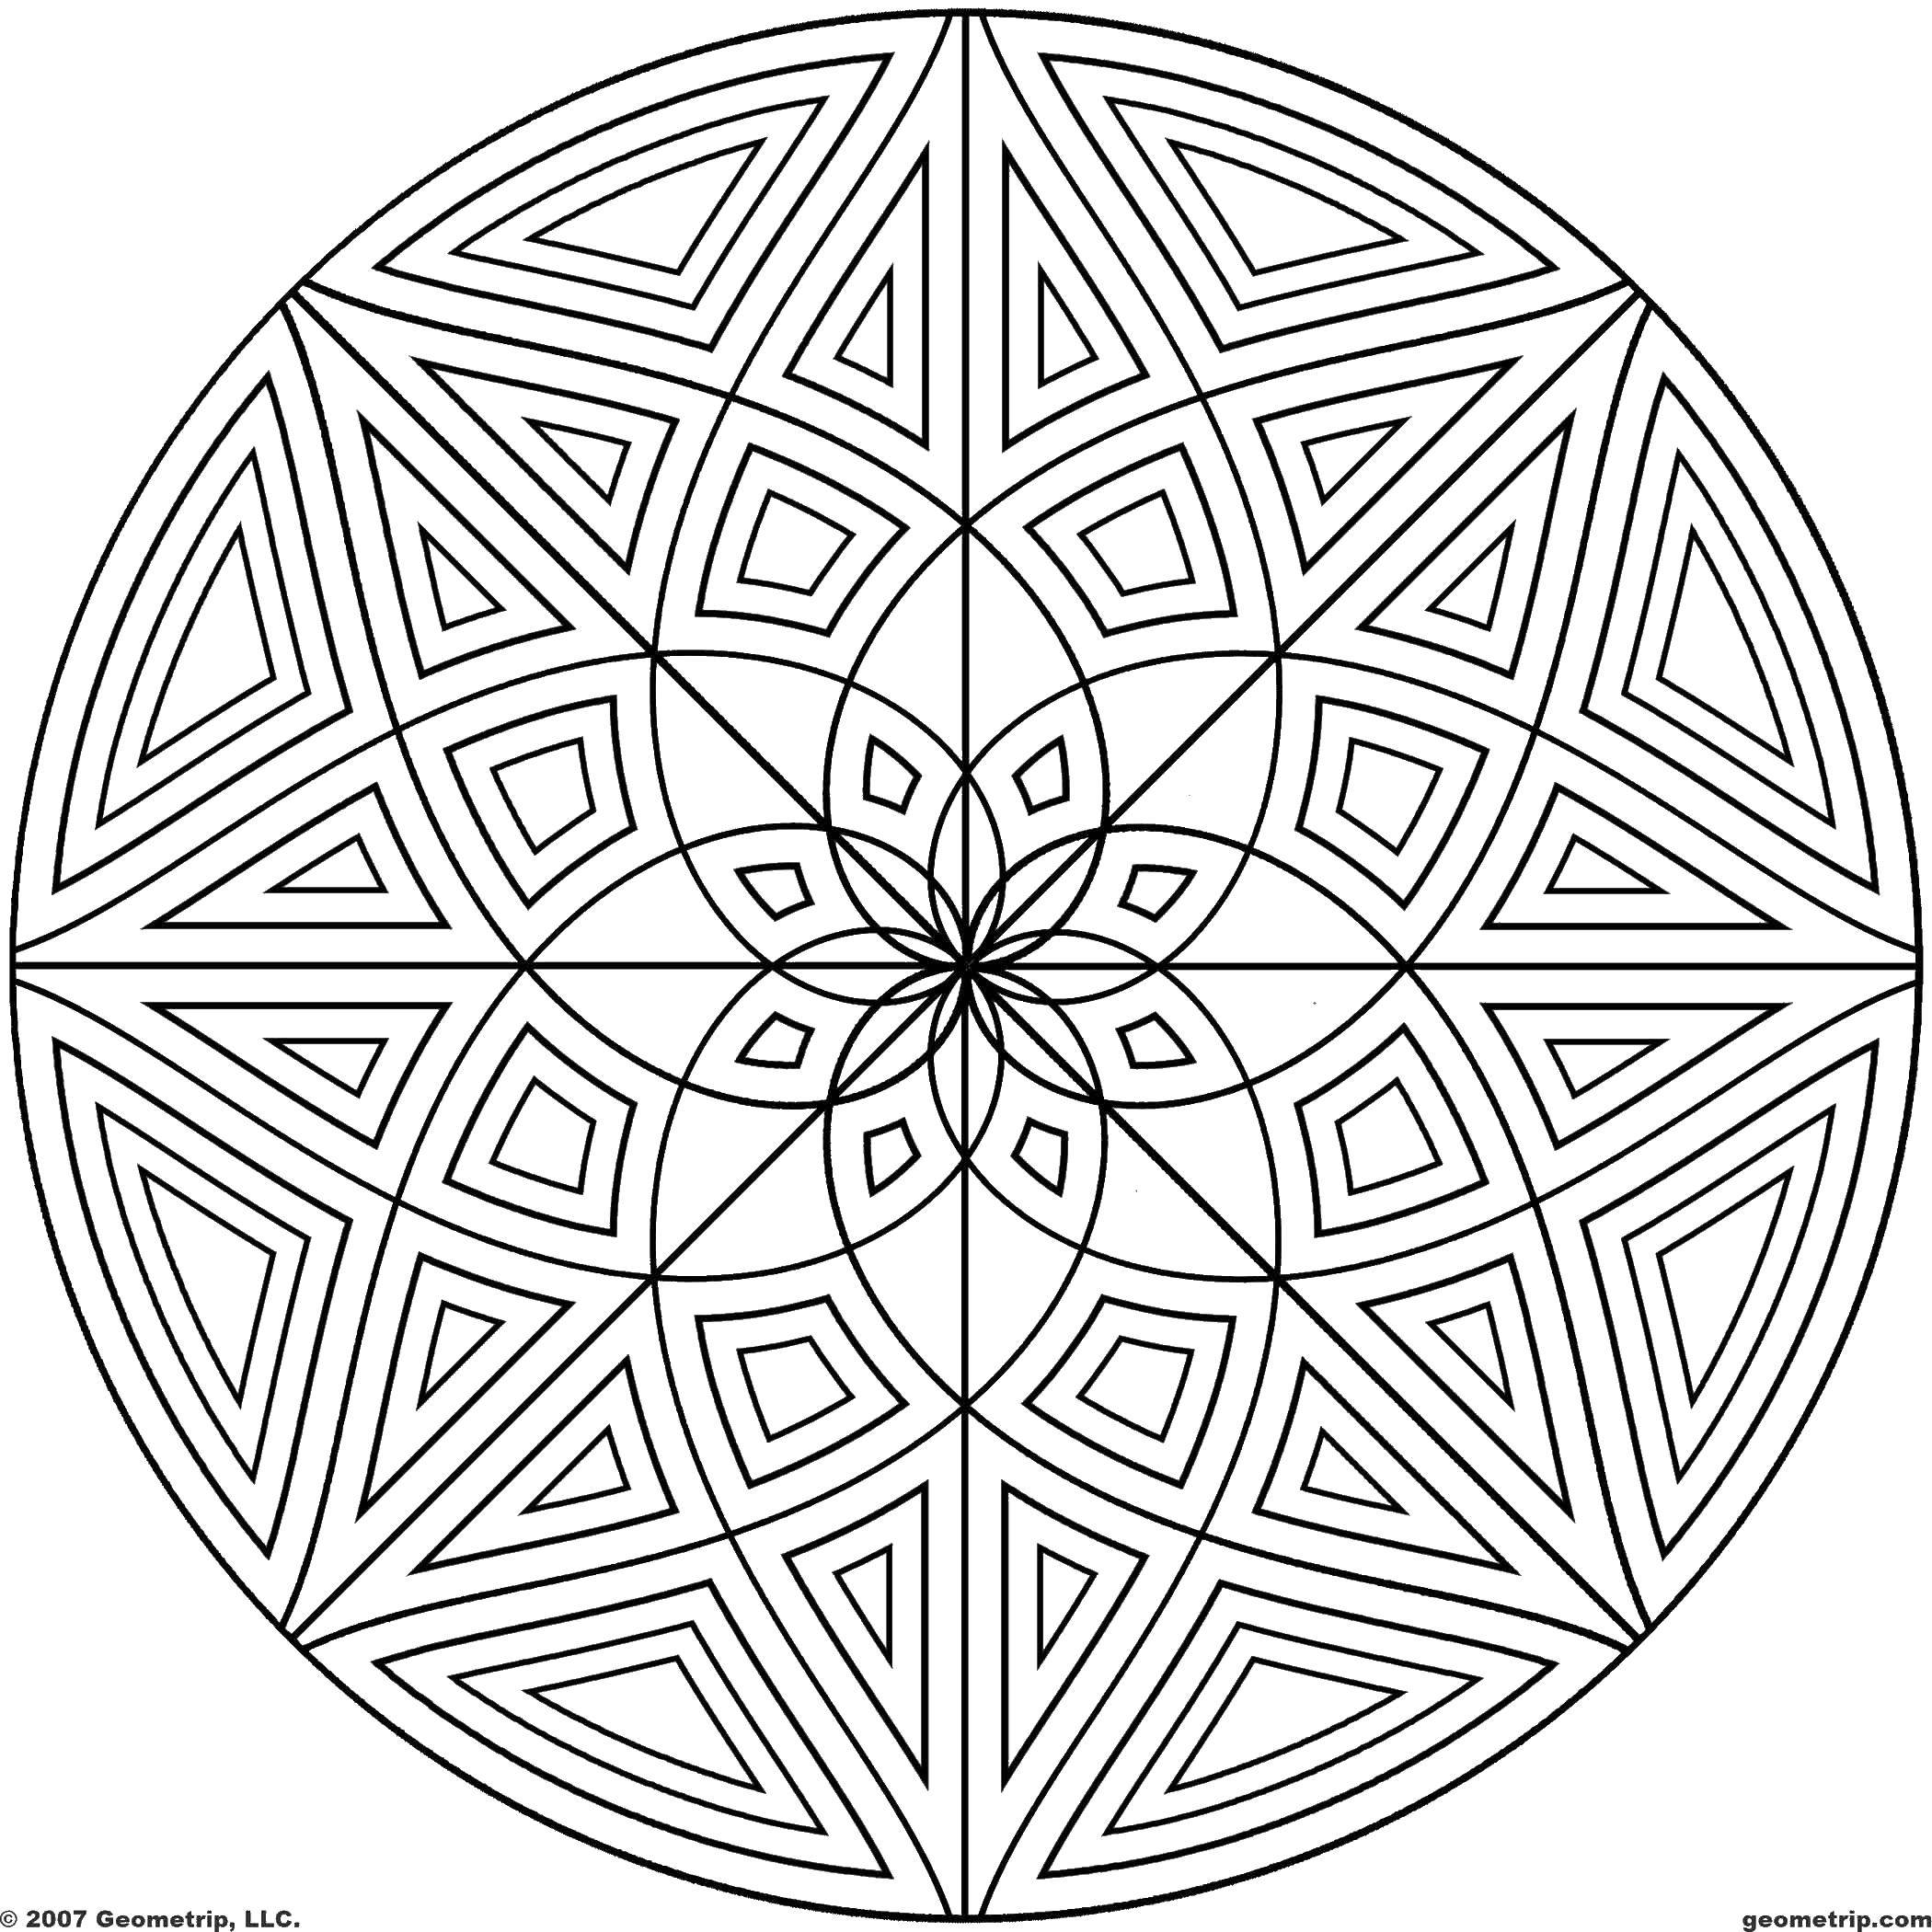 Coloring Patterned circle. Category Patterns with flowers. Tags:  Patterns, geometric.